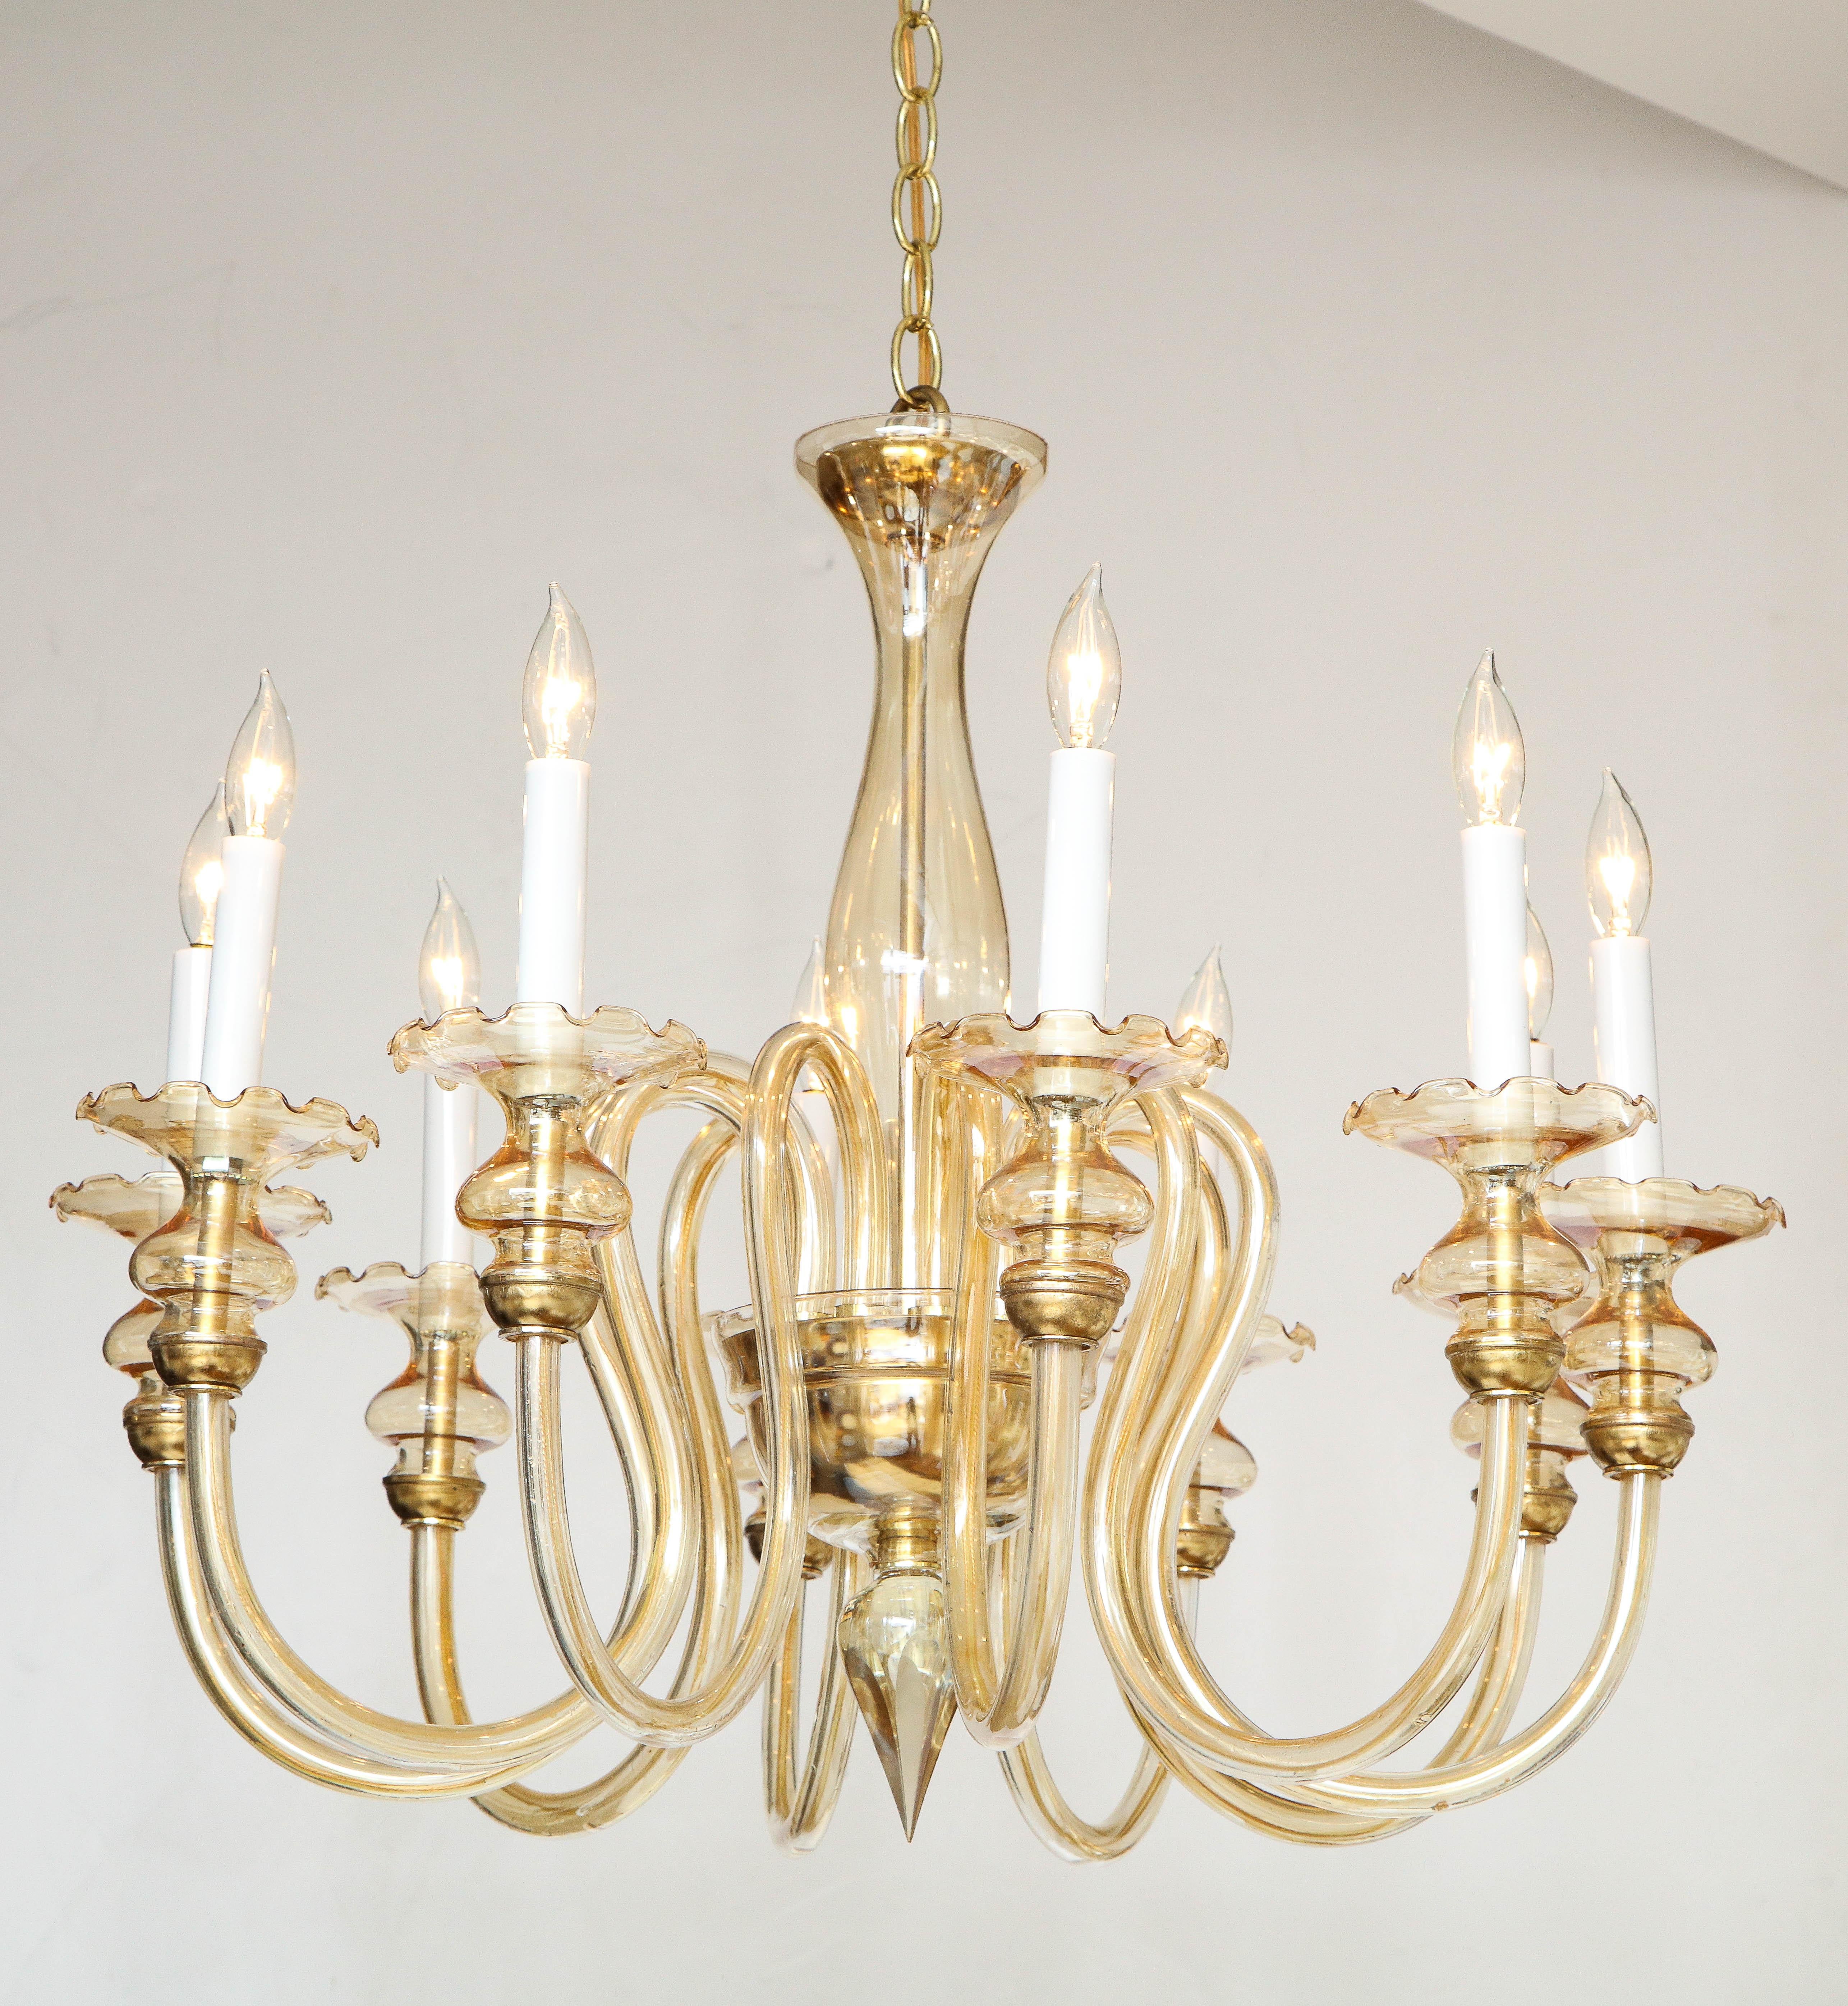 An Italian Murano 1950's hand blown glass ten arm chandelier; the bulb shaped center shaft supports the upturned ten arms which culminate with their lights surrounded by delicate glass scalloped motif and brass bobeche. The whole supported by a